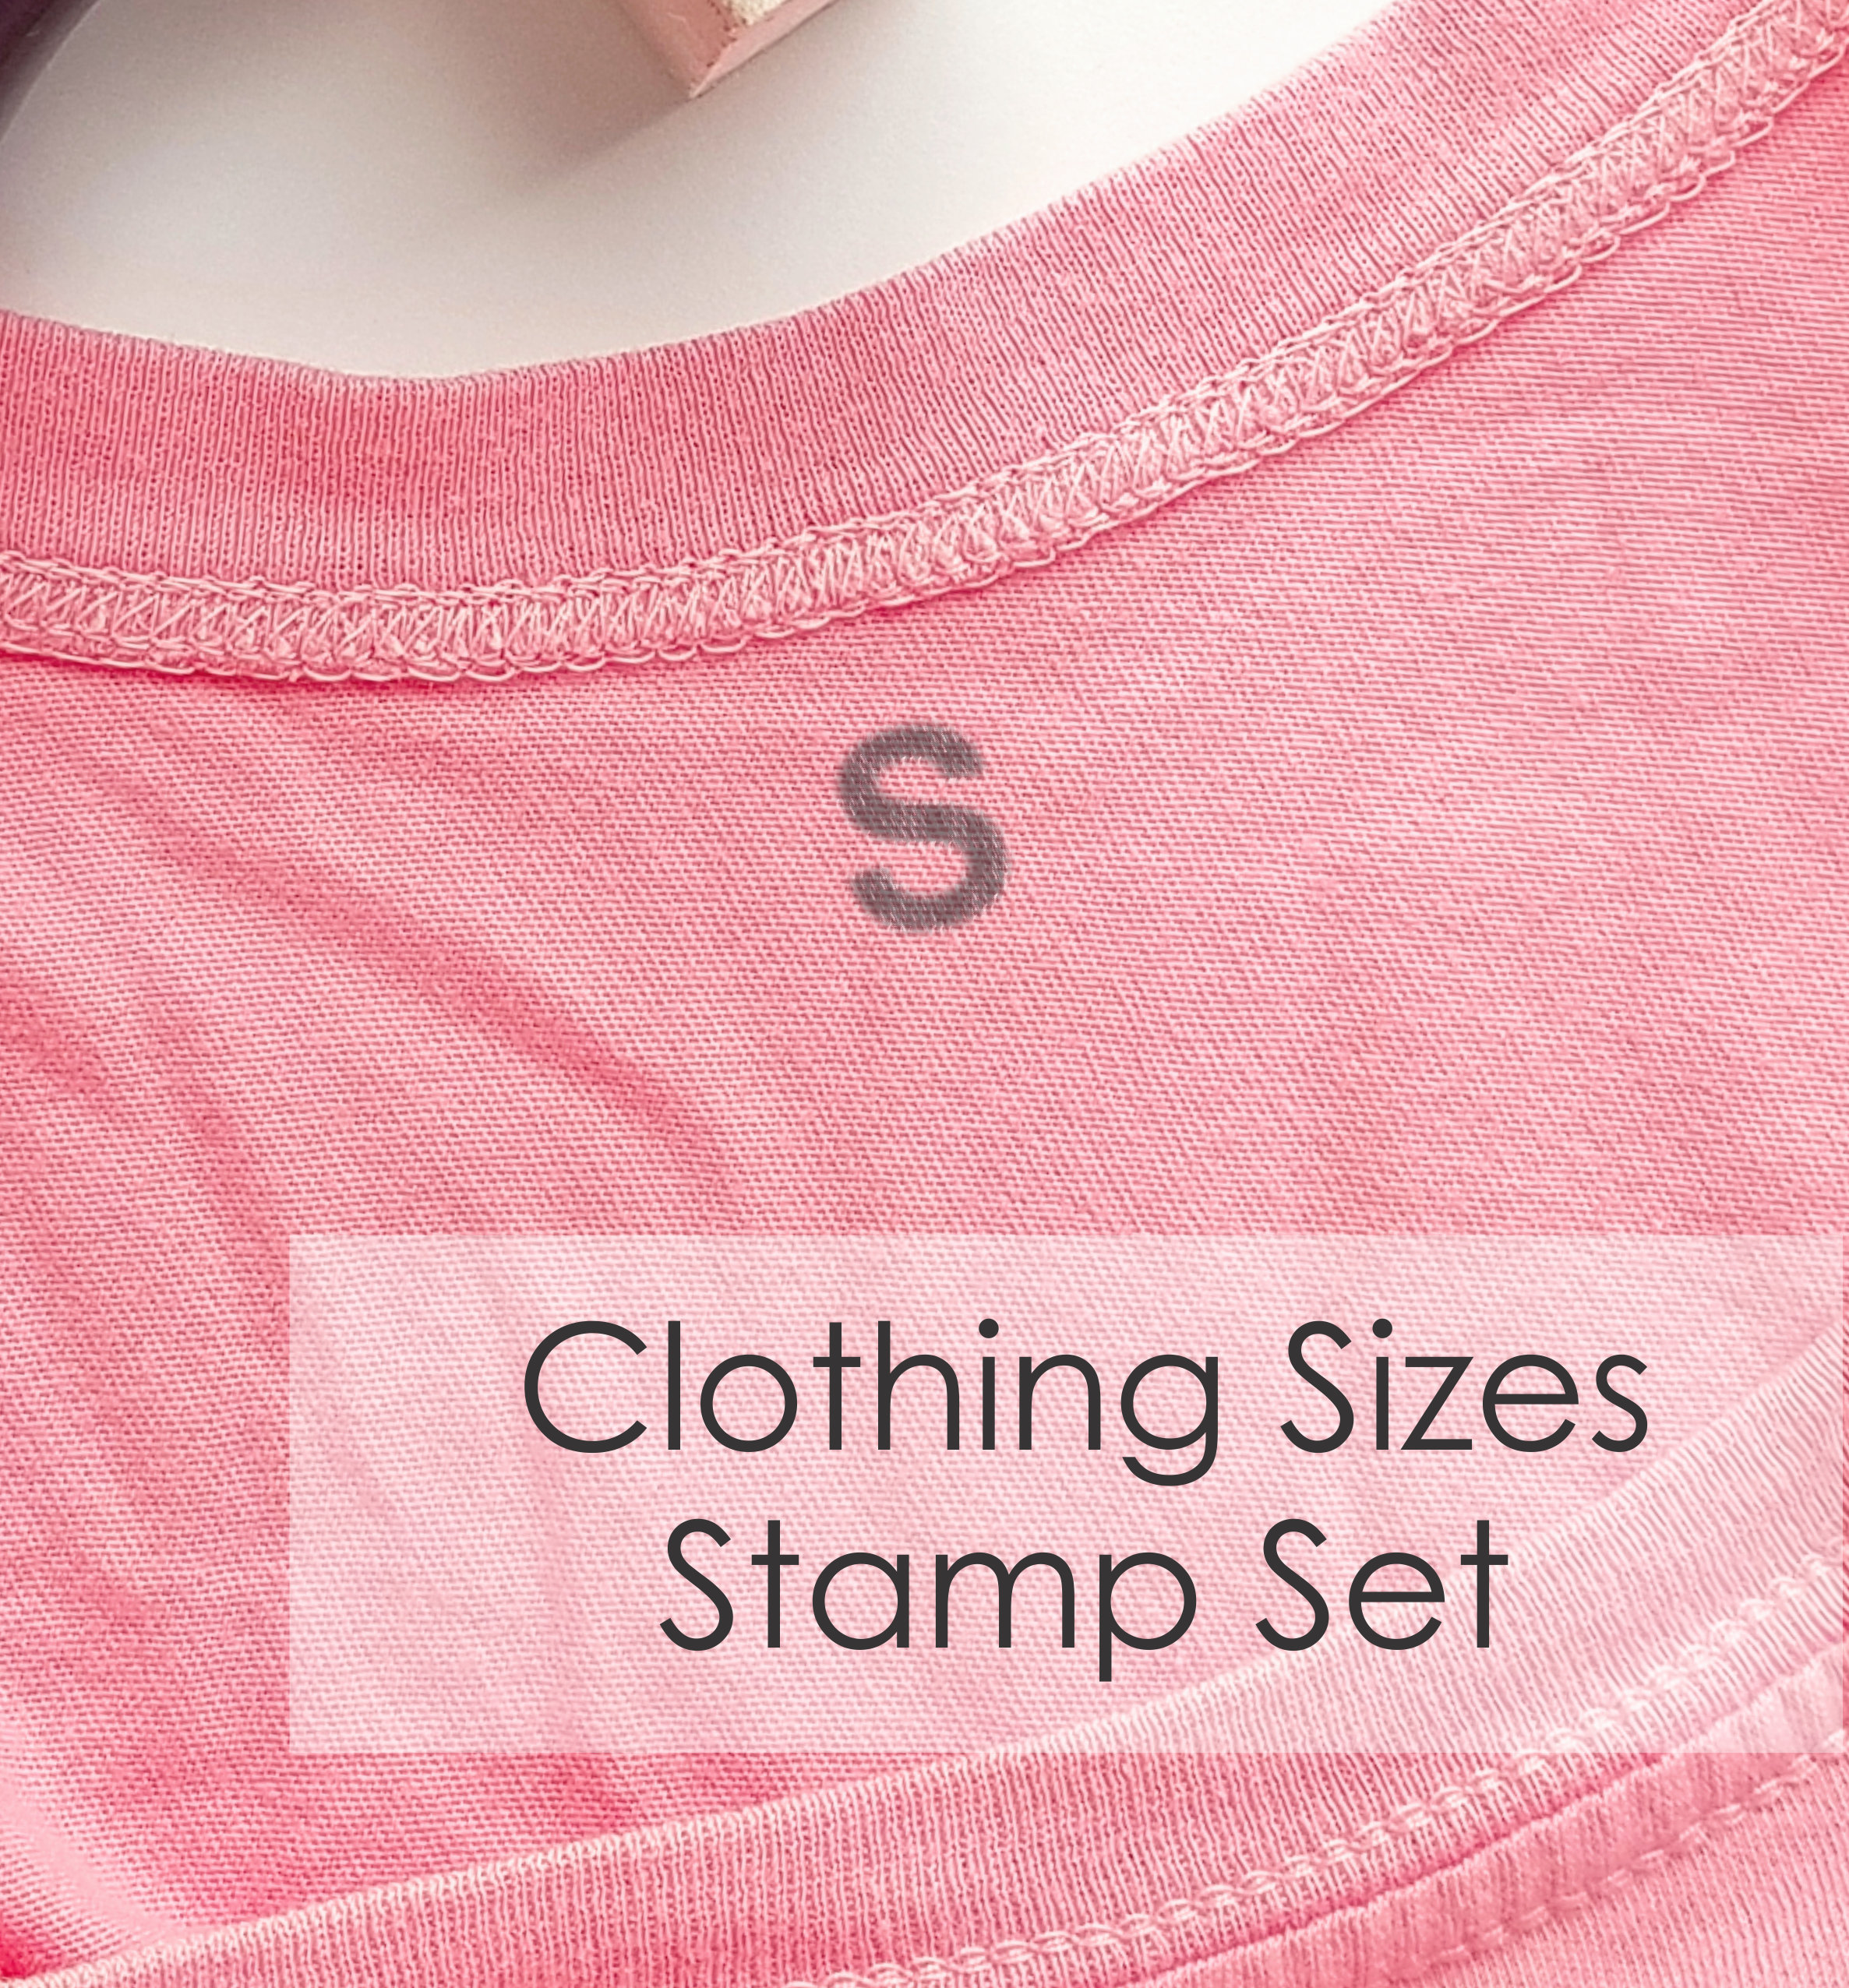 BABY CLOTHING SIZES Stamp Set, Children Clothes Sizes Labels